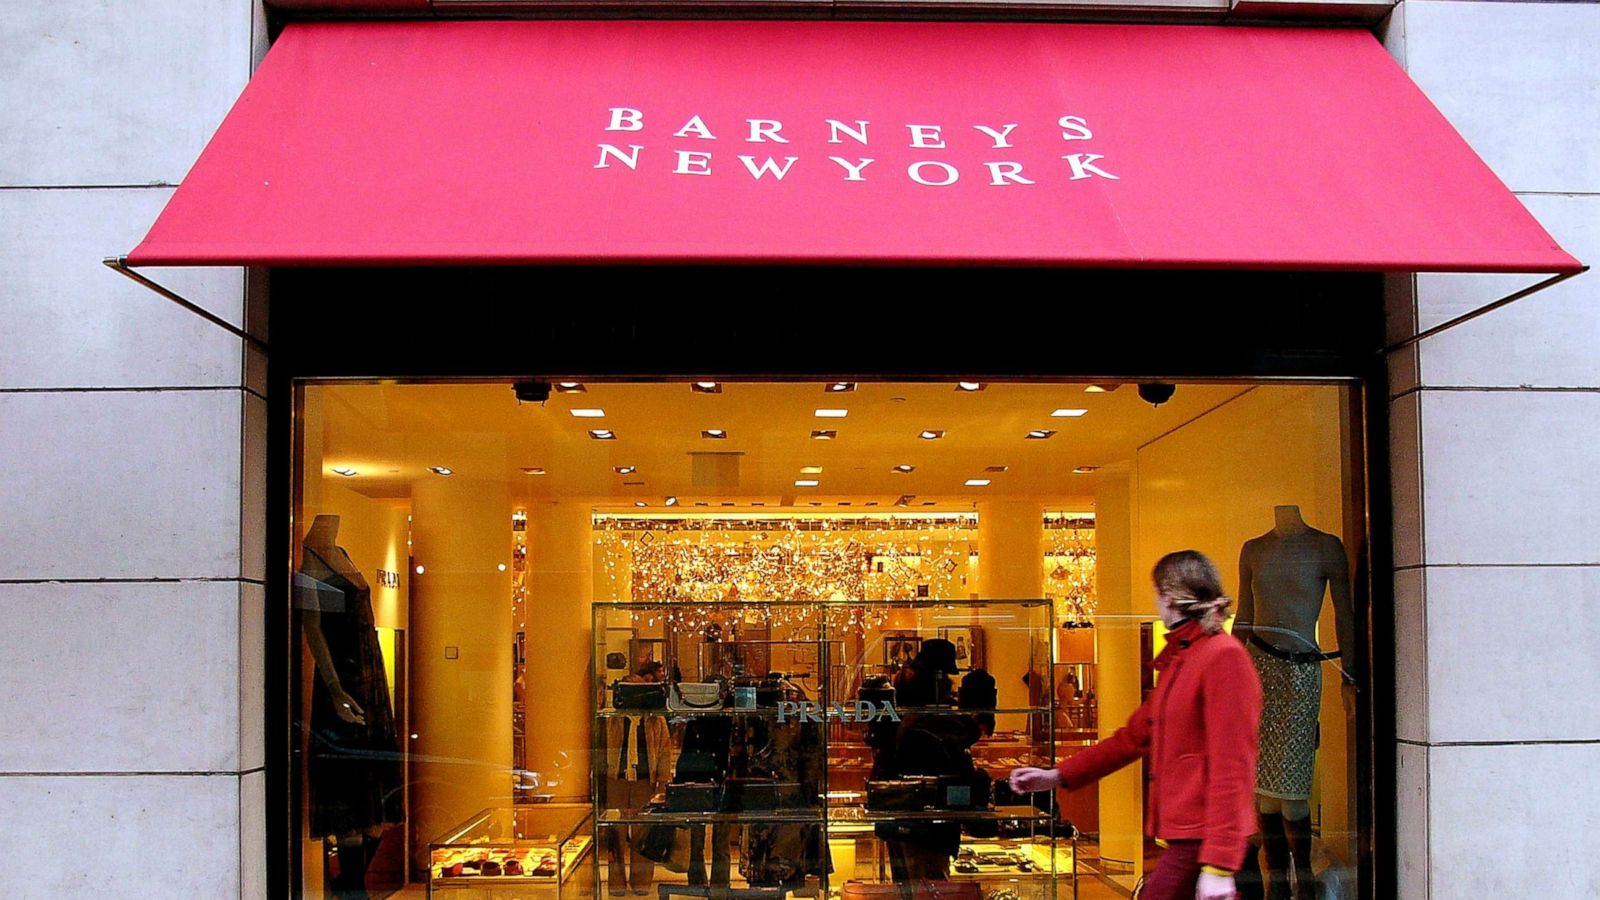 Iconic luxury retailer Barneys will likely close after bankruptcy 